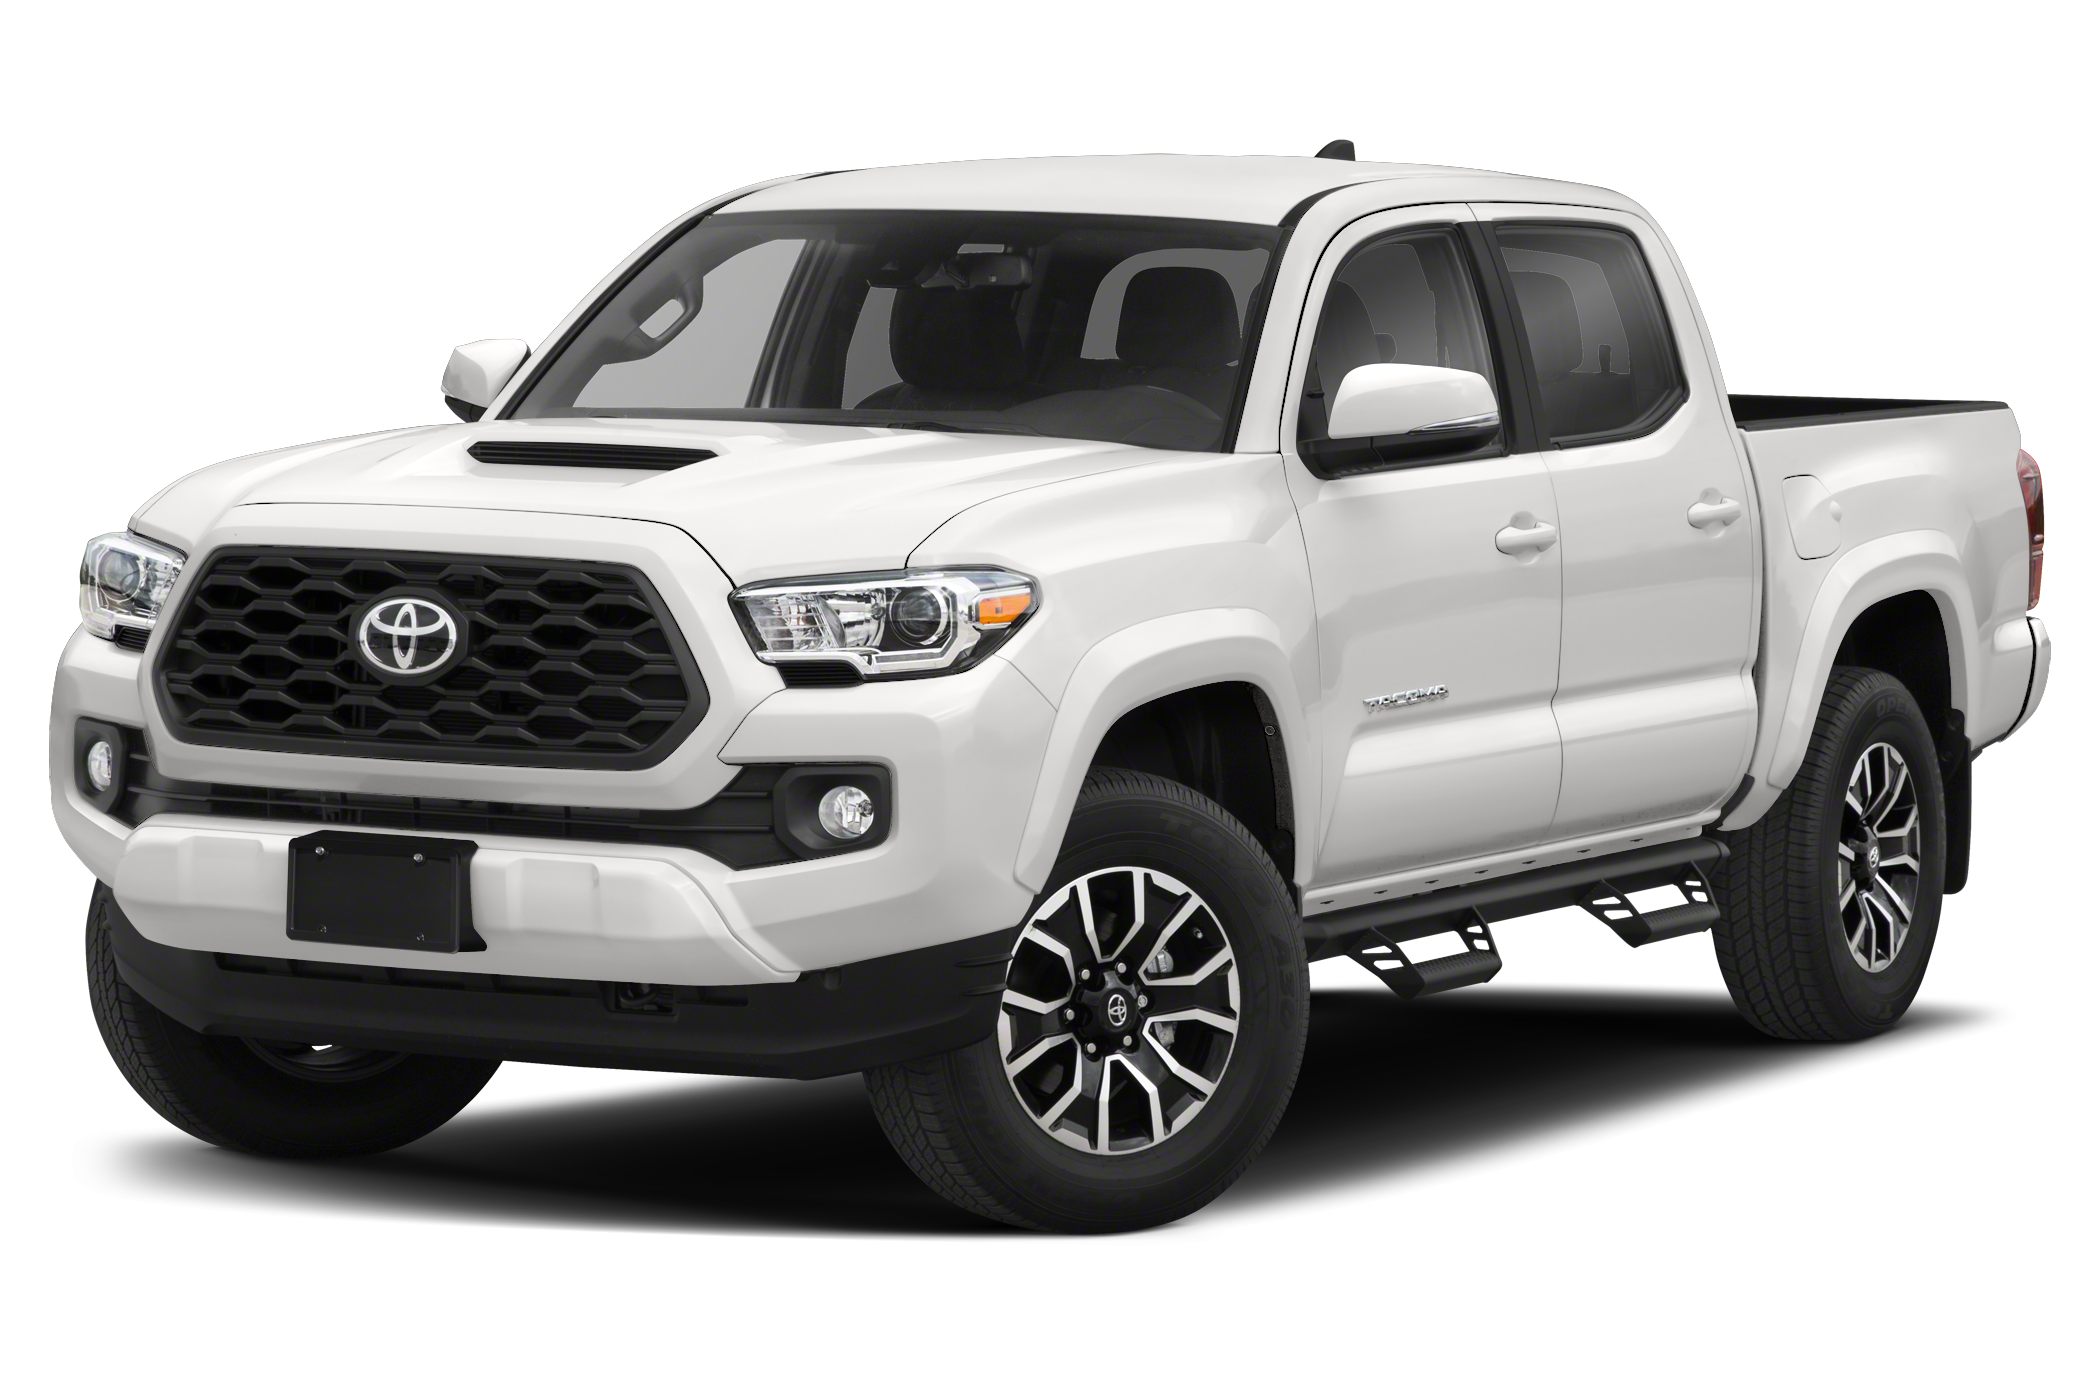 2021 Toyota Tacoma oem parts and accessories on sale